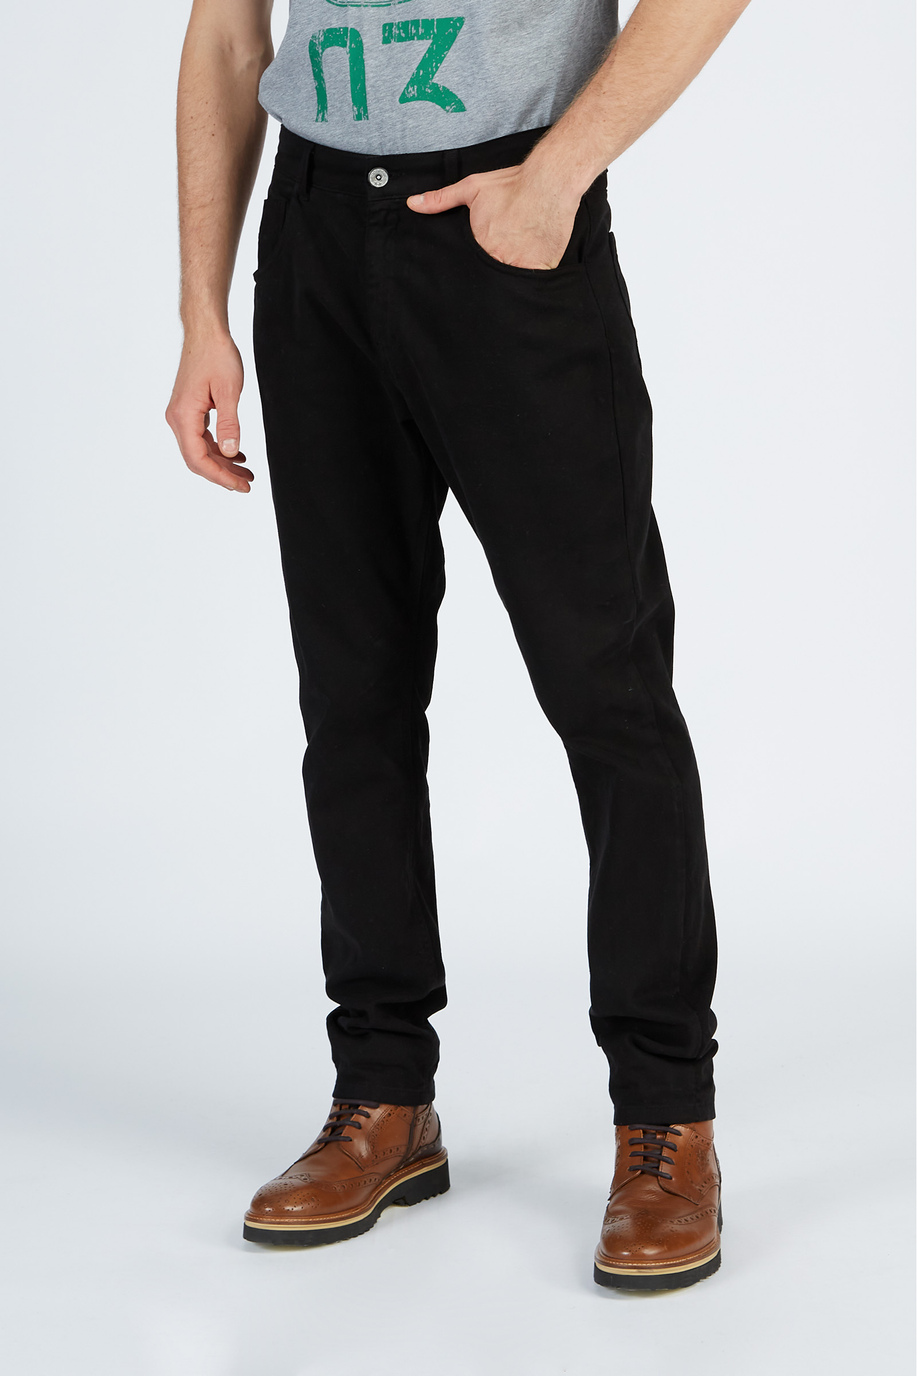 Men’s trousers in stretch cotton regular fit chino model - Elegant looks for him | La Martina - Official Online Shop